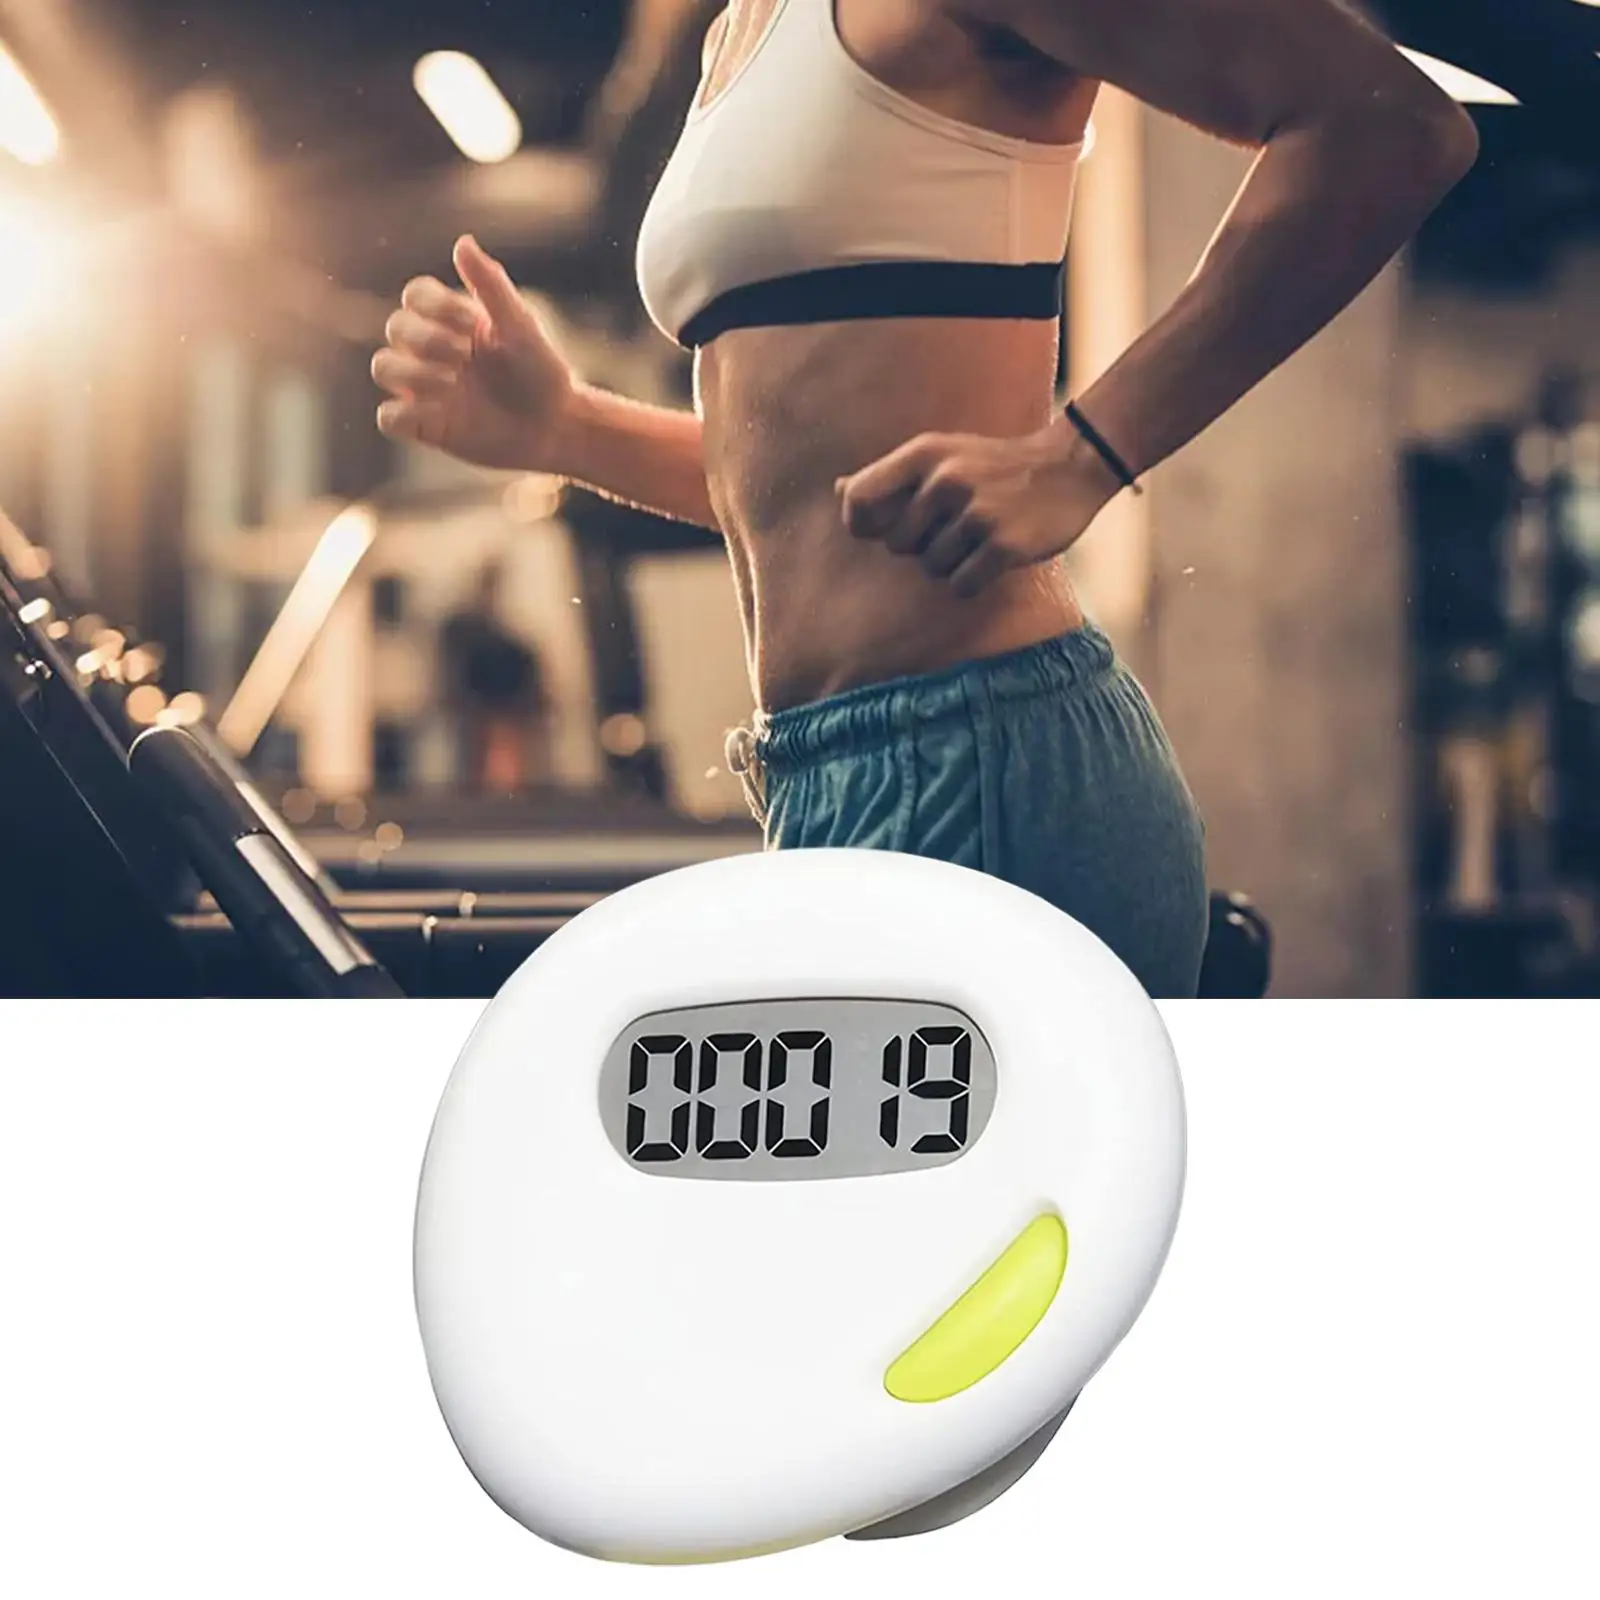 2D Digital Pedometer Electronic Pedometer Daily Target Monitor Distance Calorie